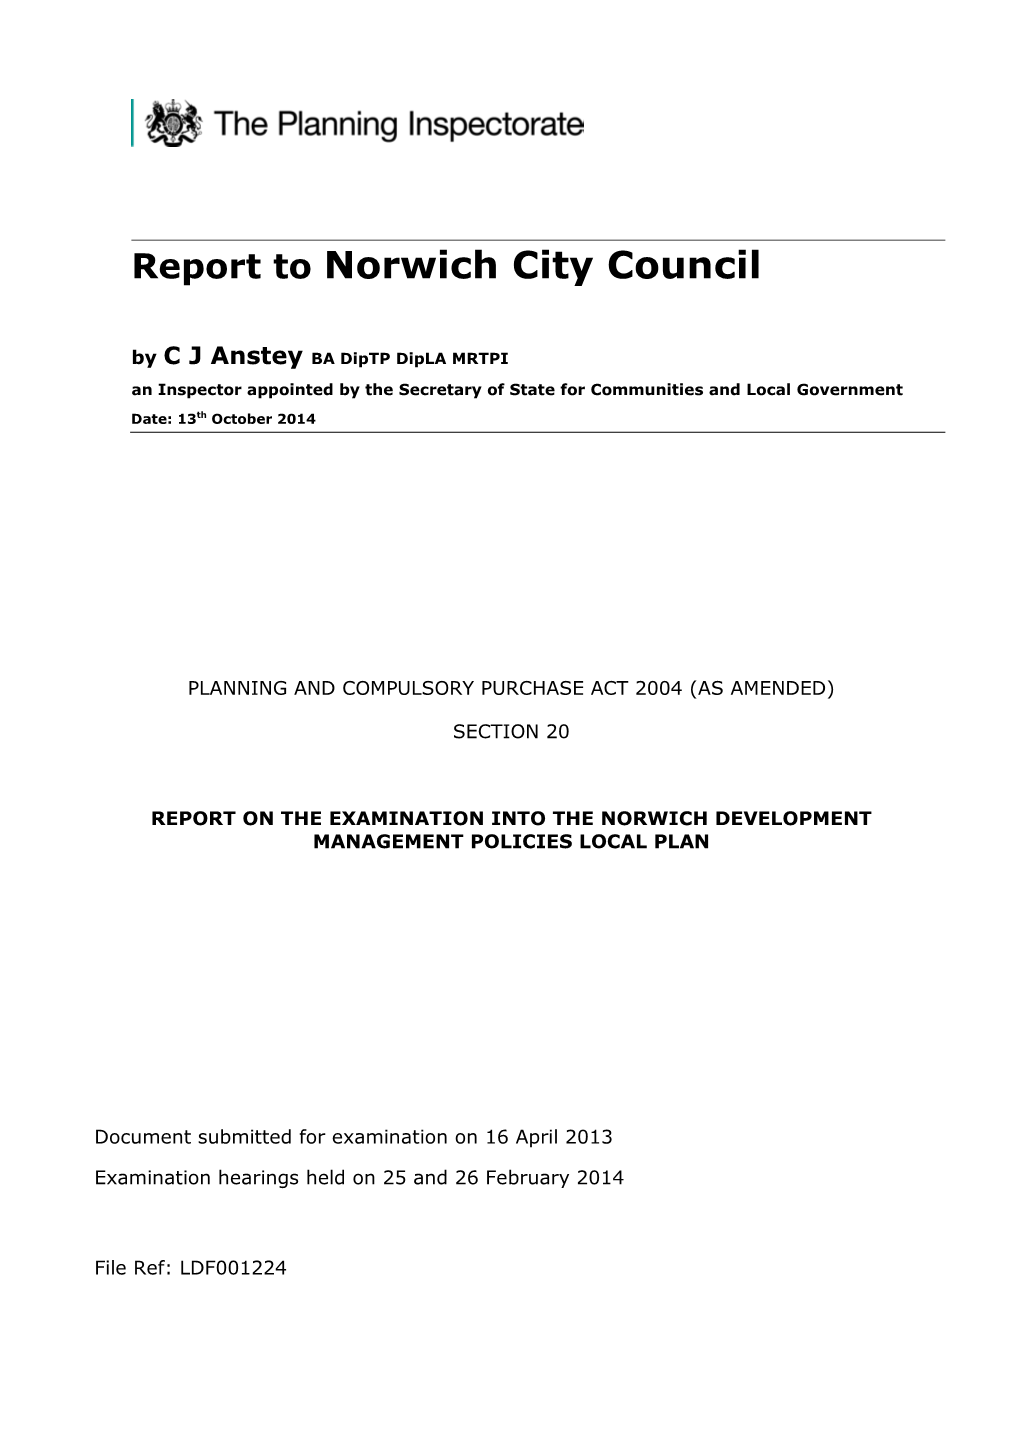 Report to Norwich City Council